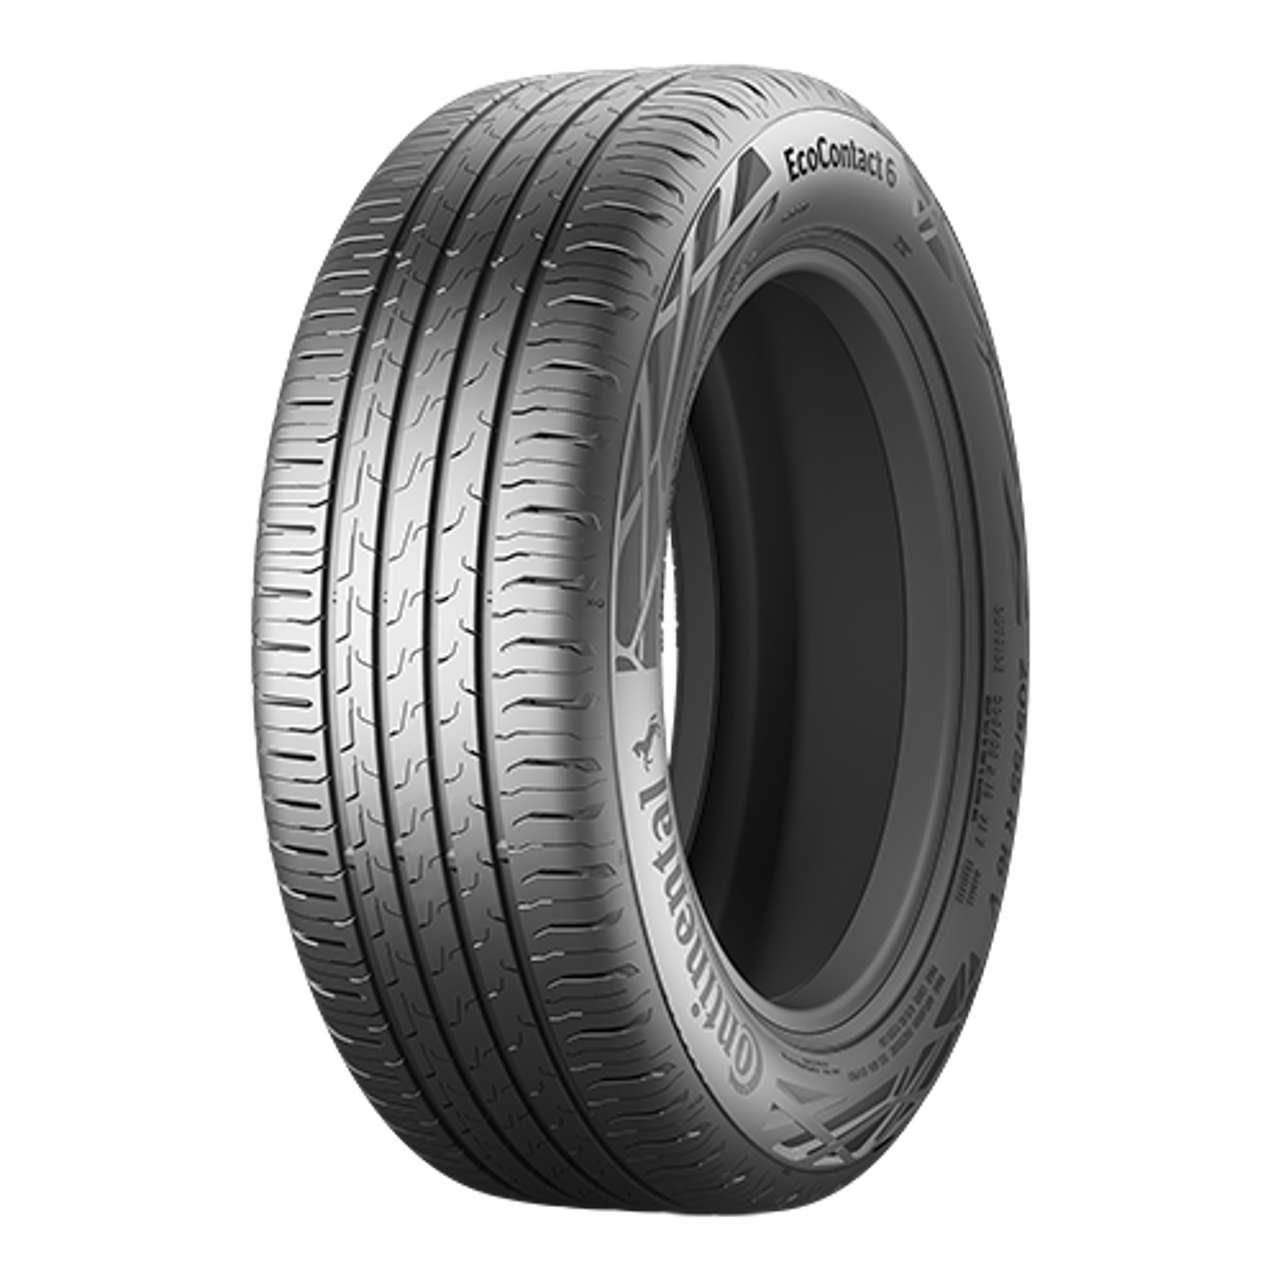 CONTINENTAL ECOCONTACT 6 (EVc) 175/65R15 84H von Continental